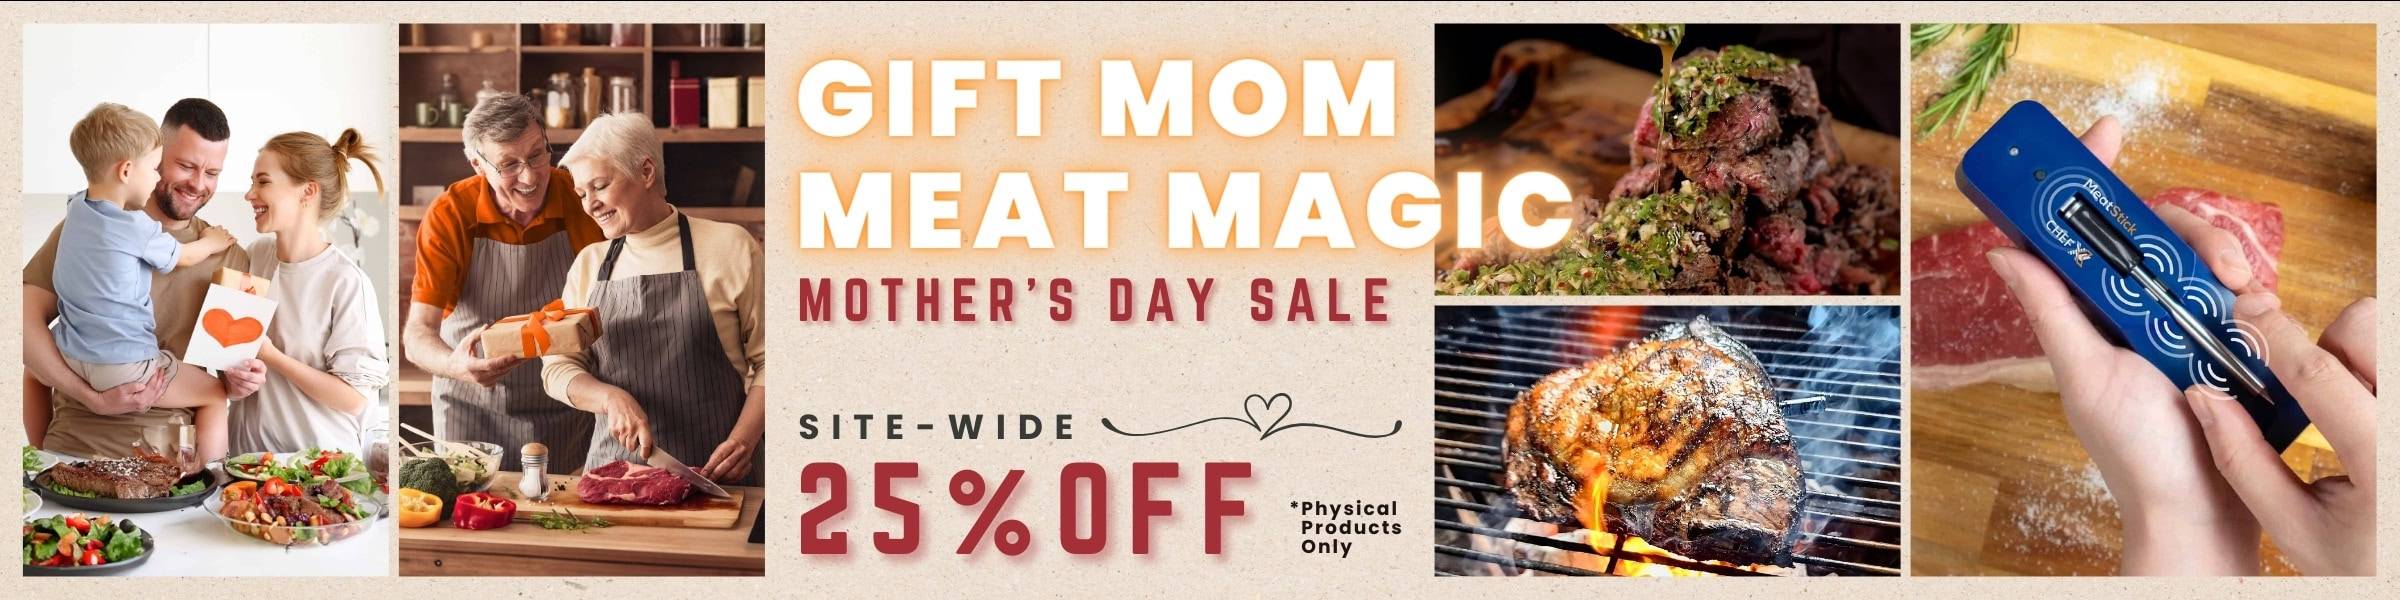 The Meatstick Wireless Meat Thermometer Mother's Day Sale - 25% Off Sitewide - Save Big Now!